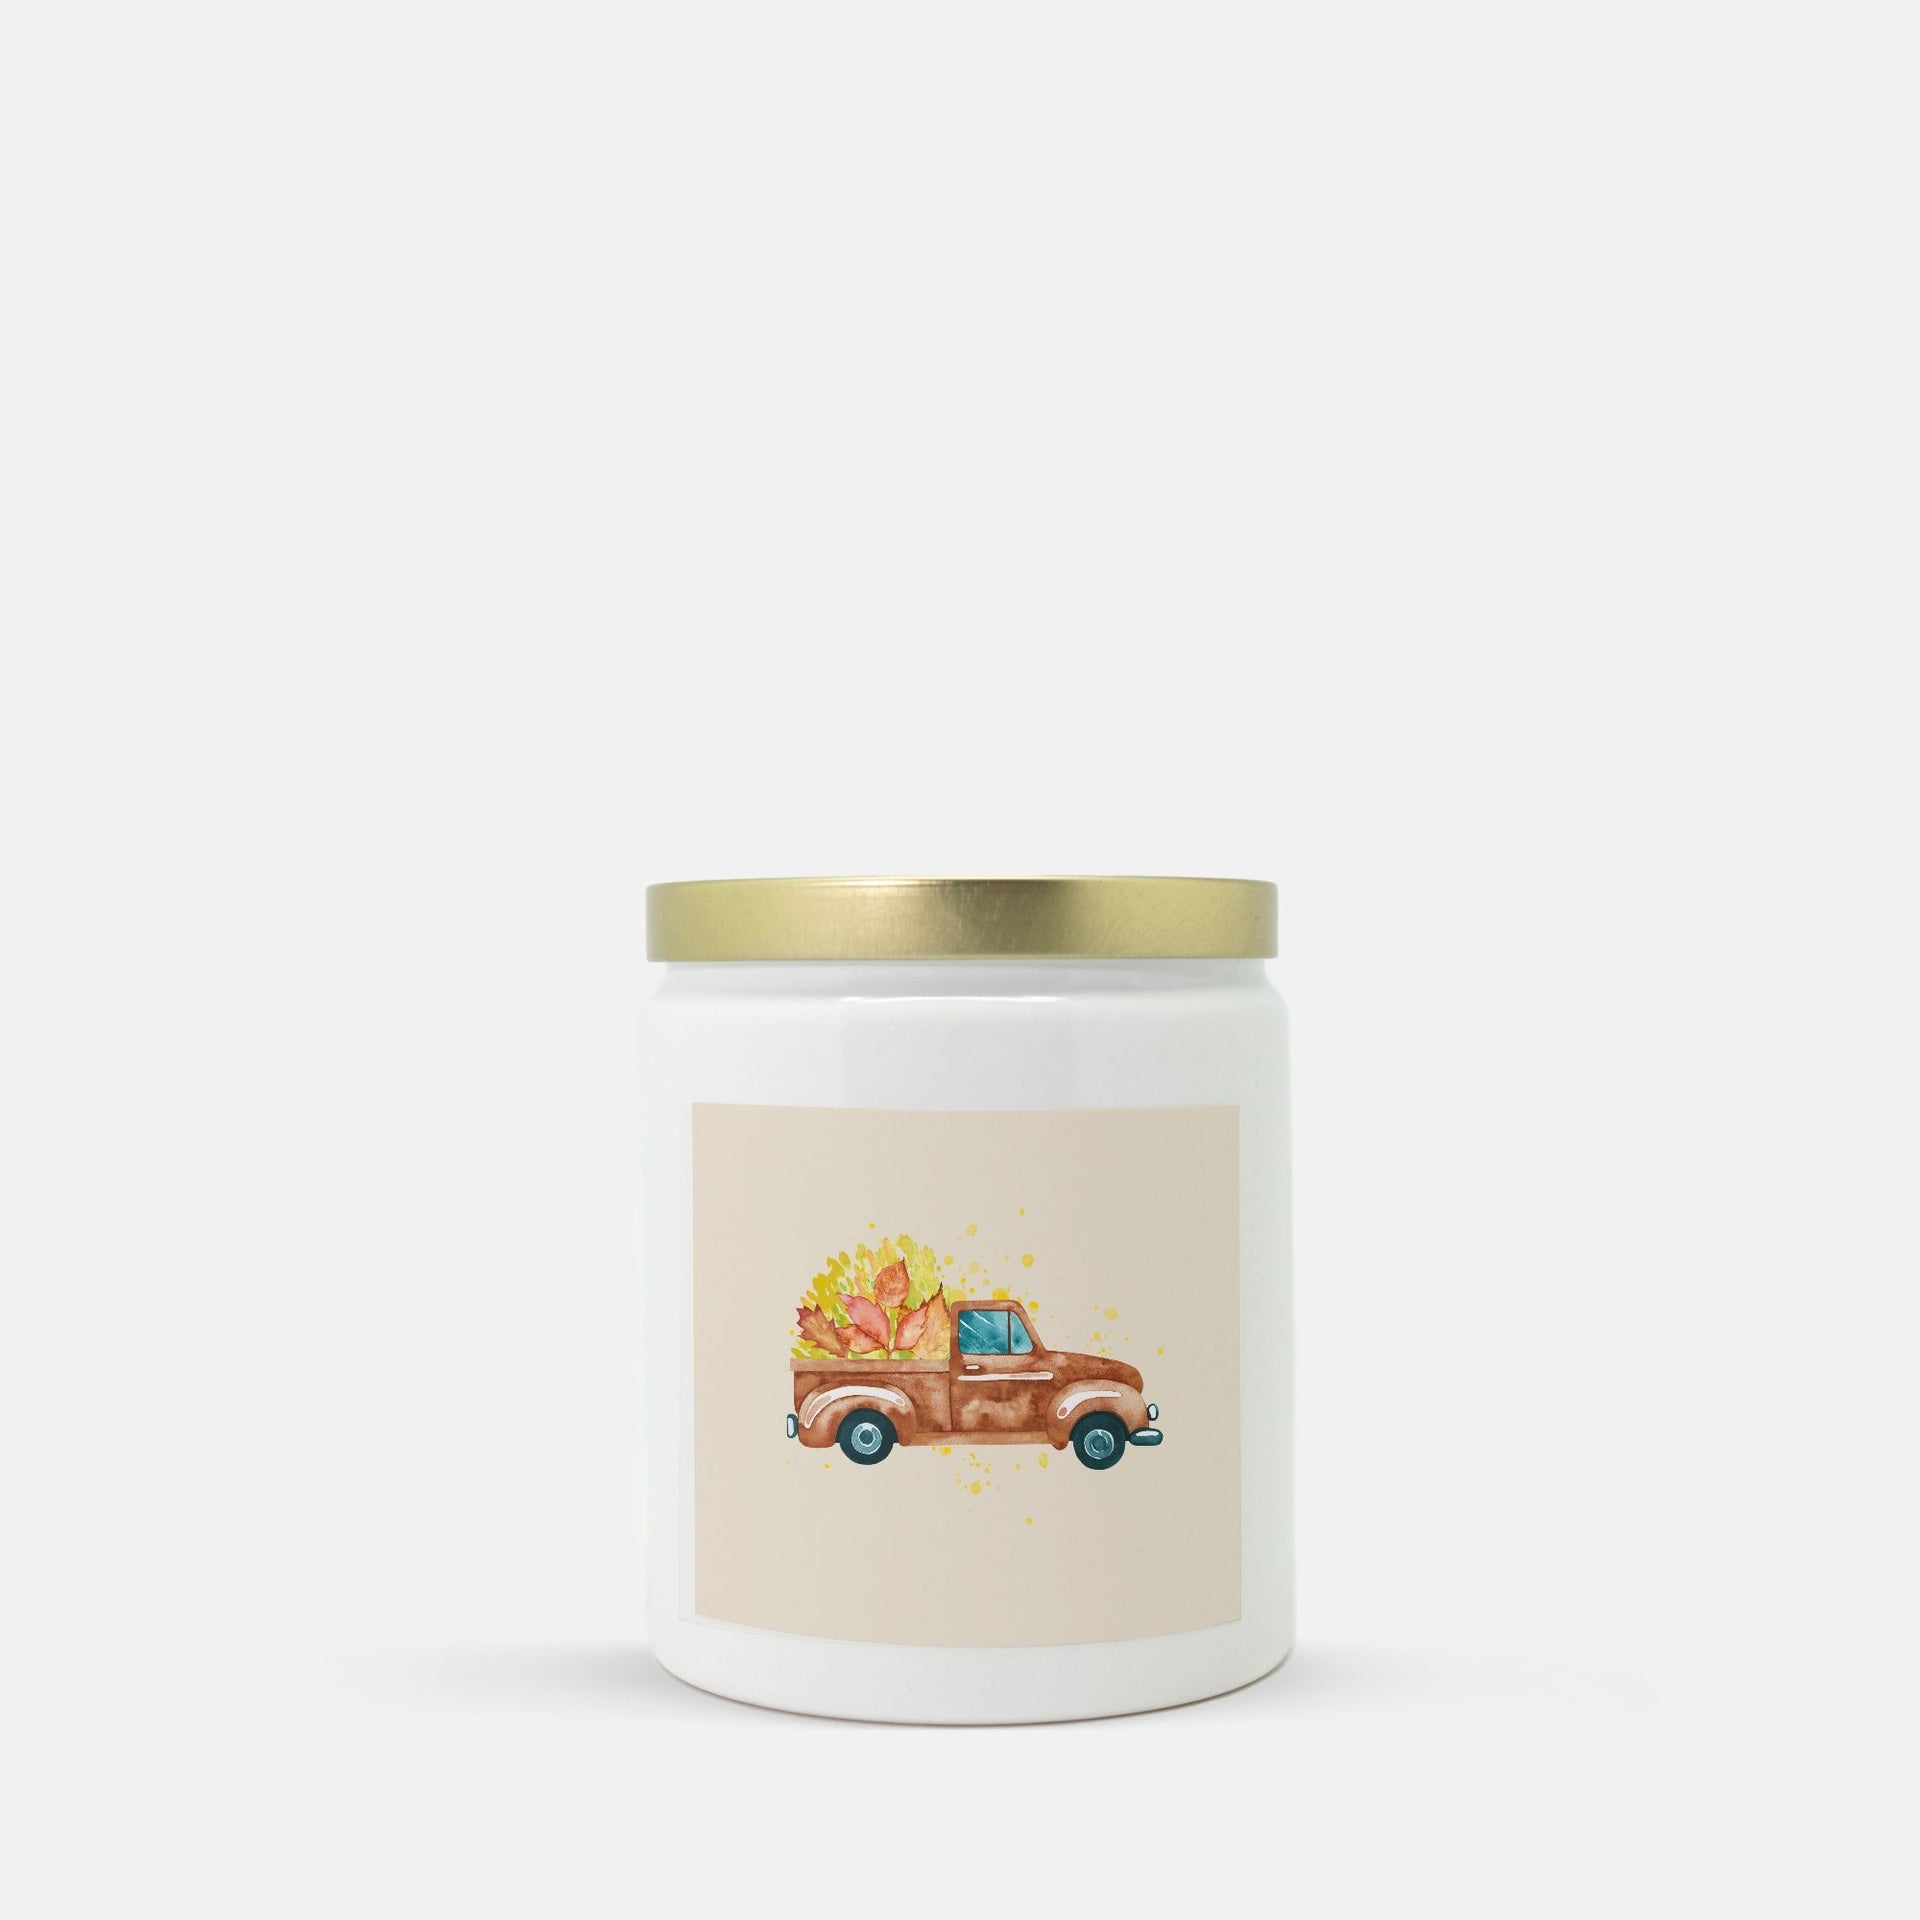 Lifestyle Details - Brown Rustic Truck & Leaves Ceramic Candle w Gold Lid - Vanilla Bean